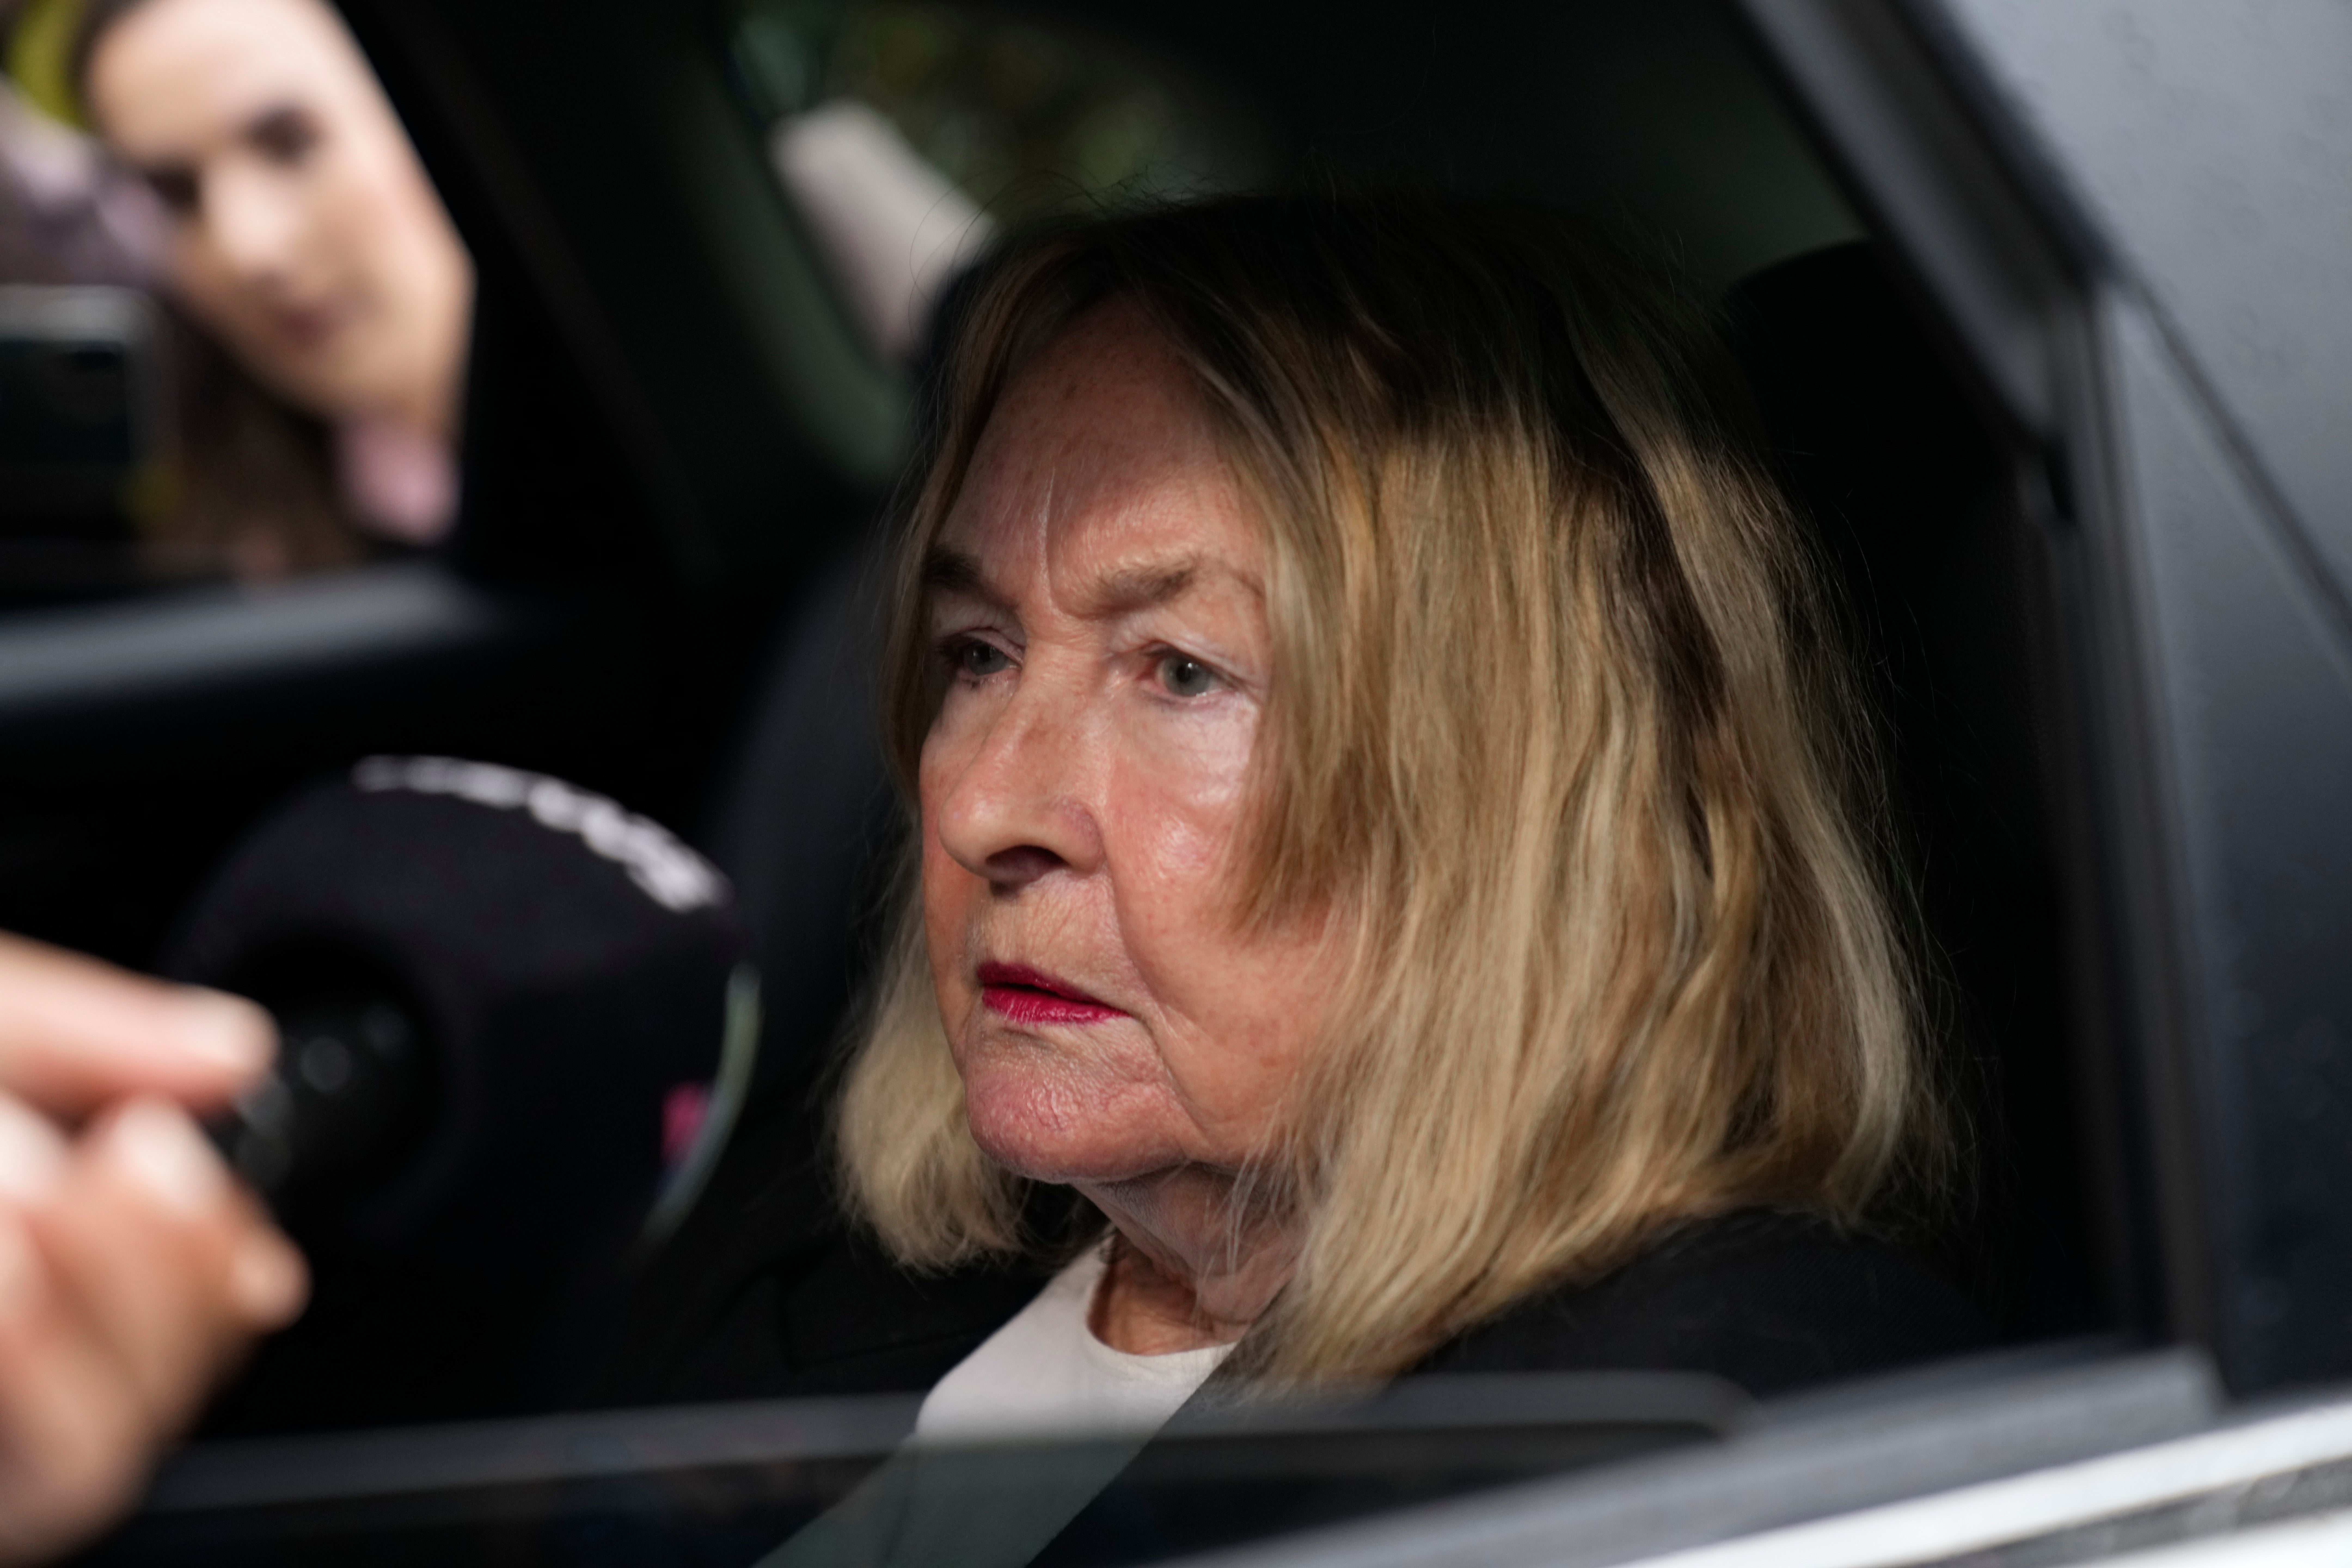 June Steenkamp said her pain is ‘still raw and real’